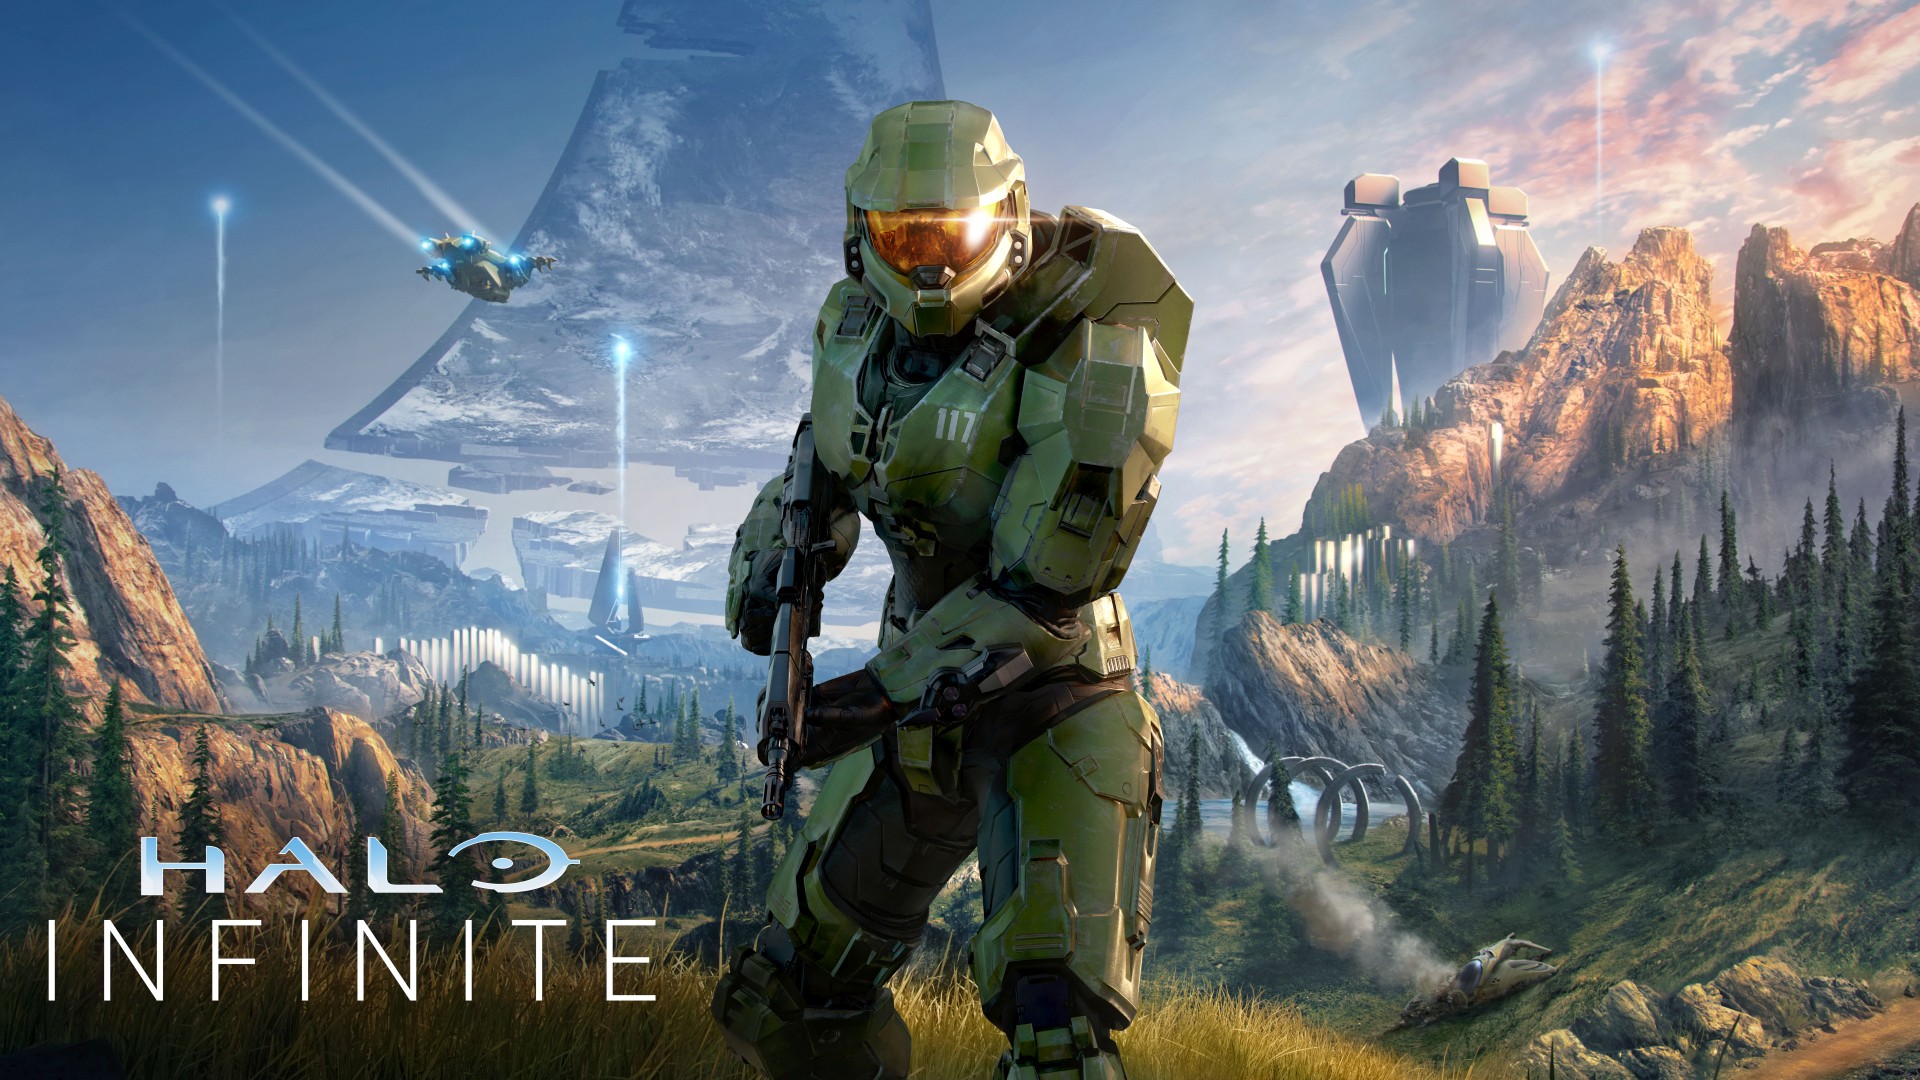 Halo Infinite: The Latest Updates and Impact on Gaming